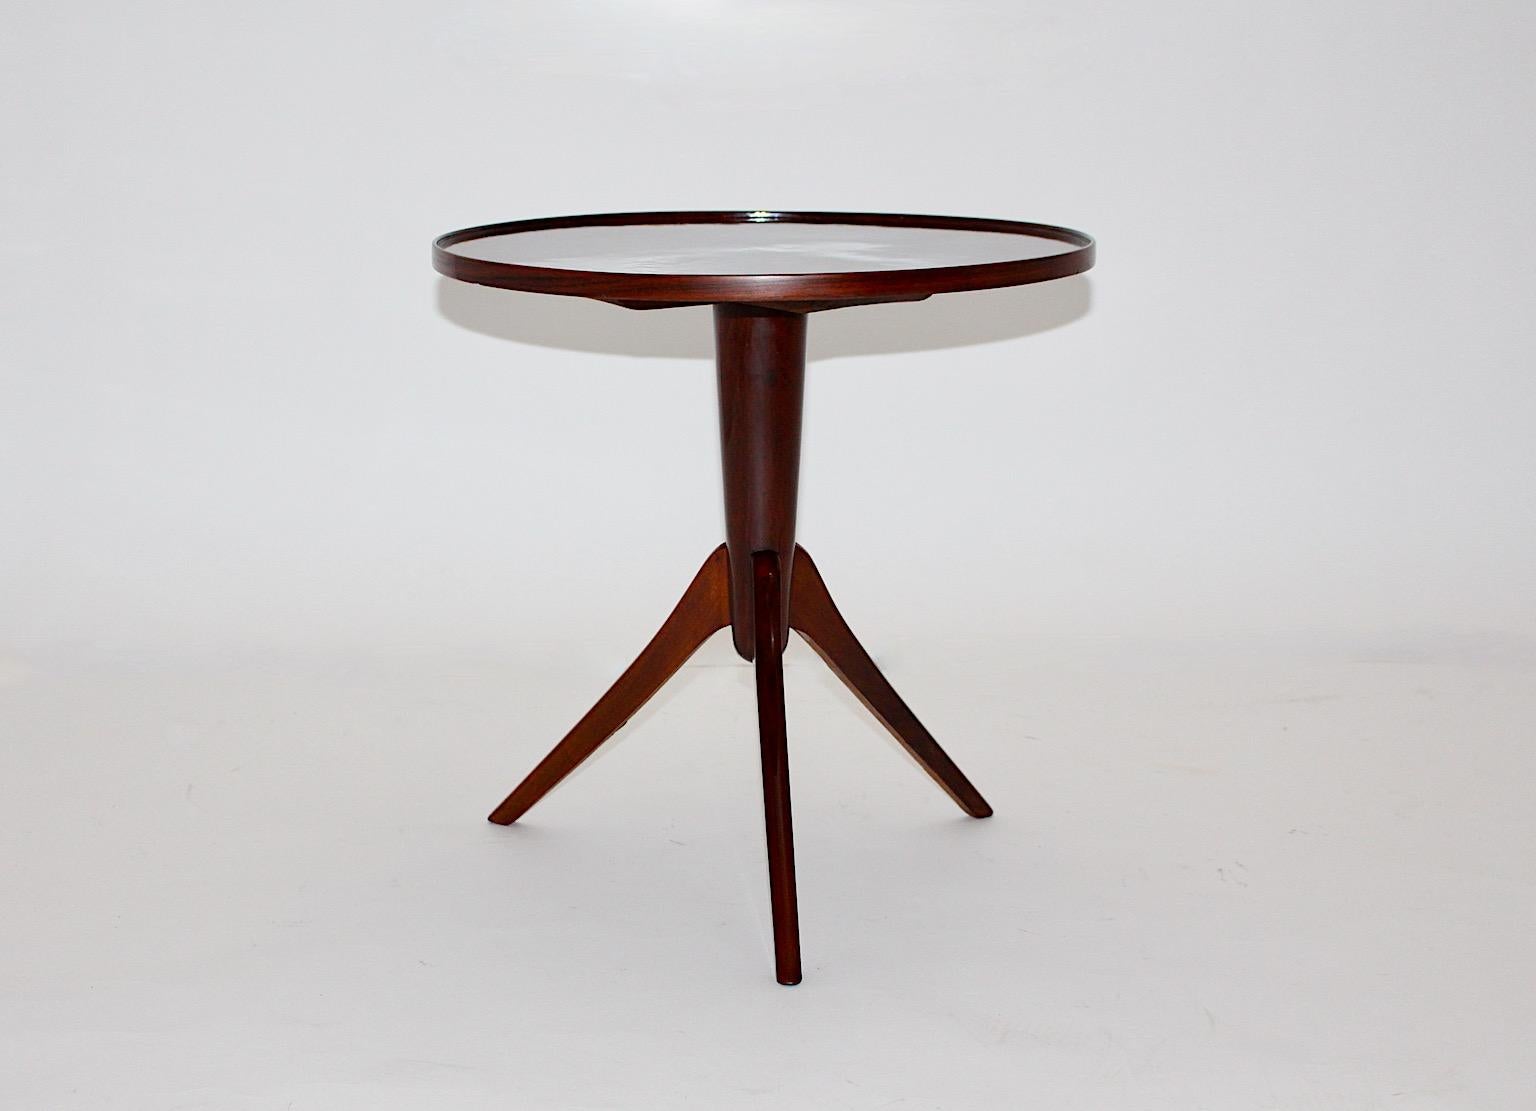 Art Deco vintage beautiful side table from walnut design attributed to Josef Frank 1930s Vienna.
The stellar shaped walnut veneers form an amazing veneer picture at the top, while the three legs made from solid walnut promise a good stability.
The